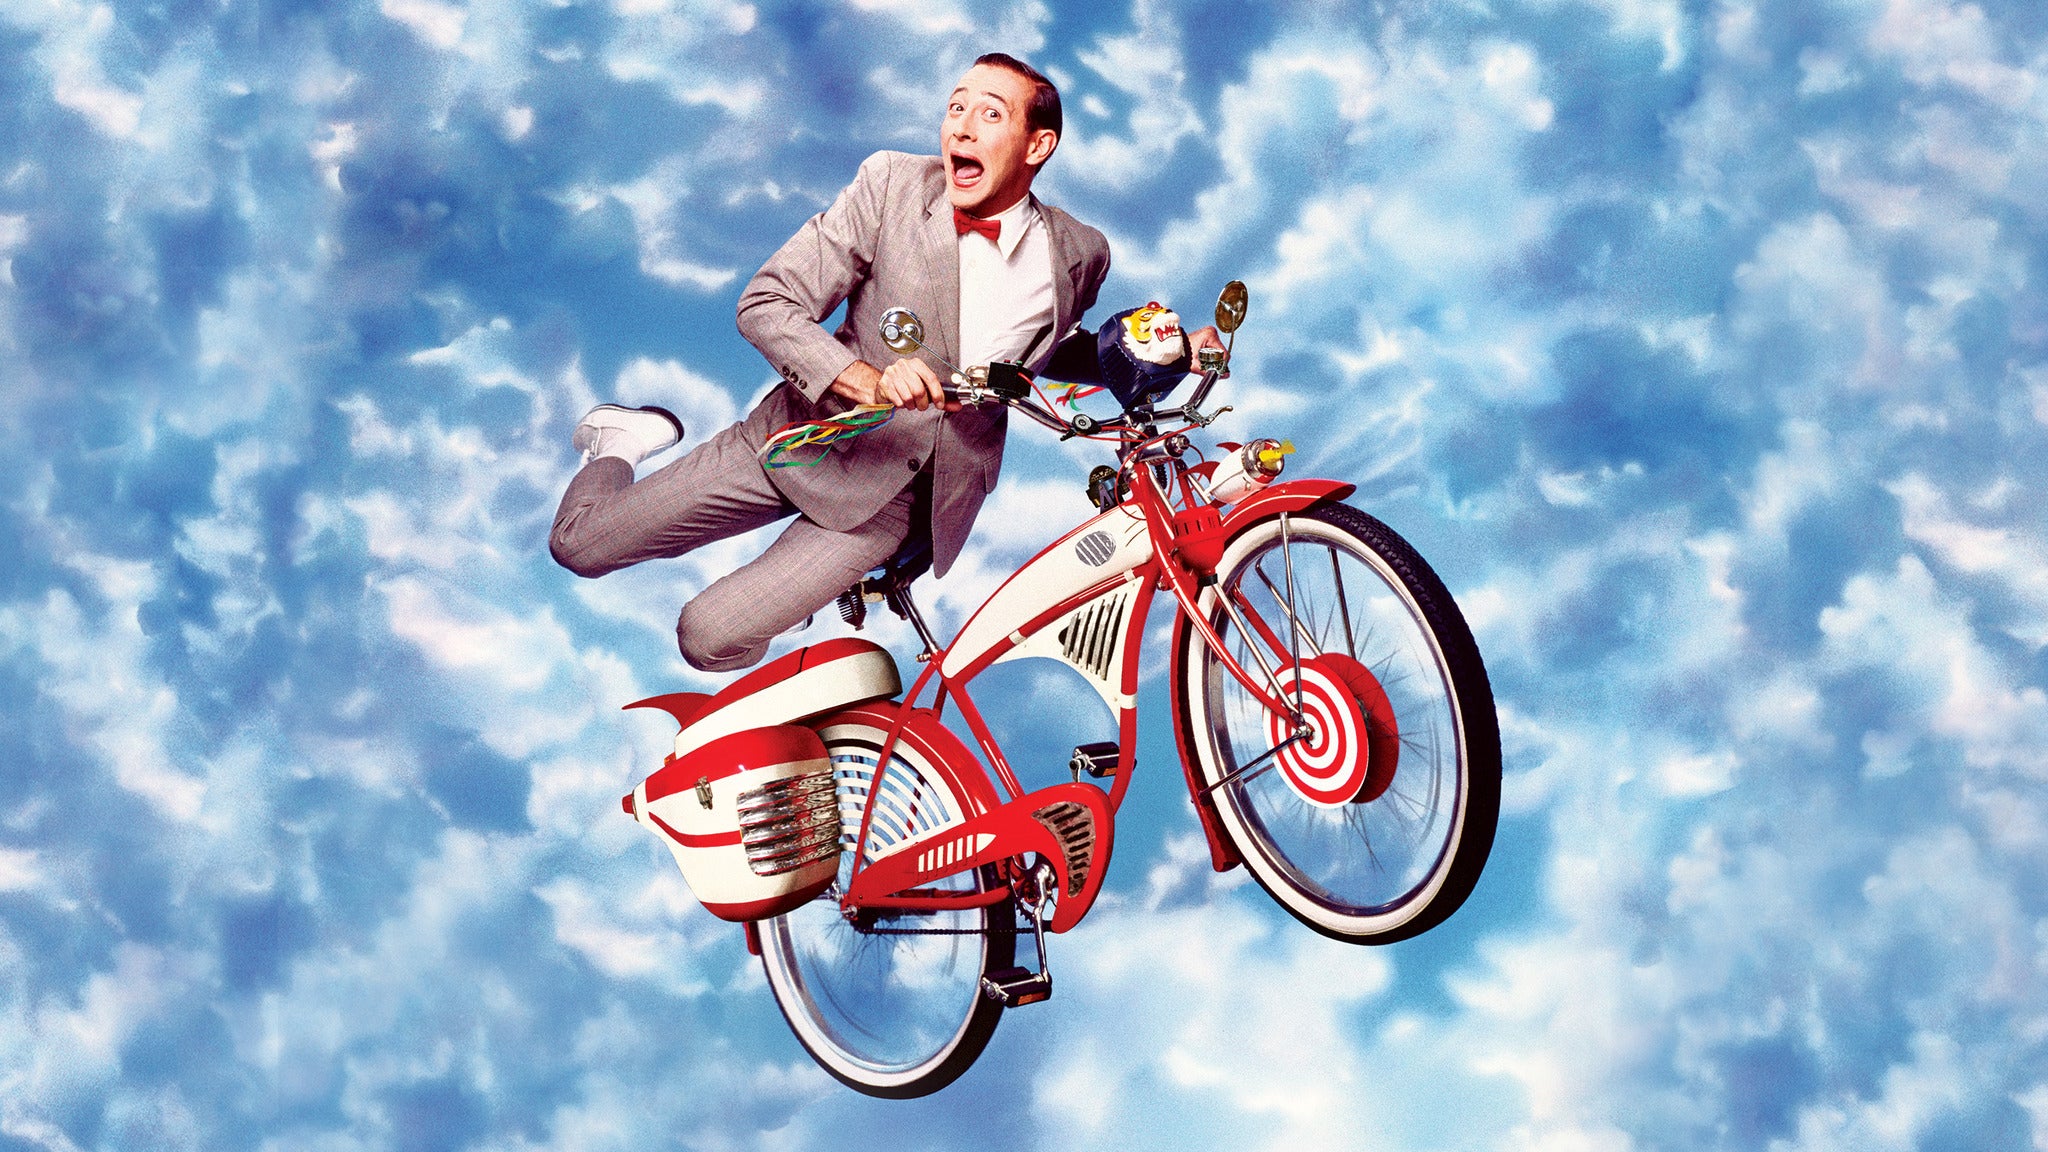 Pee-wee's Big Adventure 35th Anniversary Tour with Paul Reubens in Los Angeles promo photo for Official Platinum presale offer code